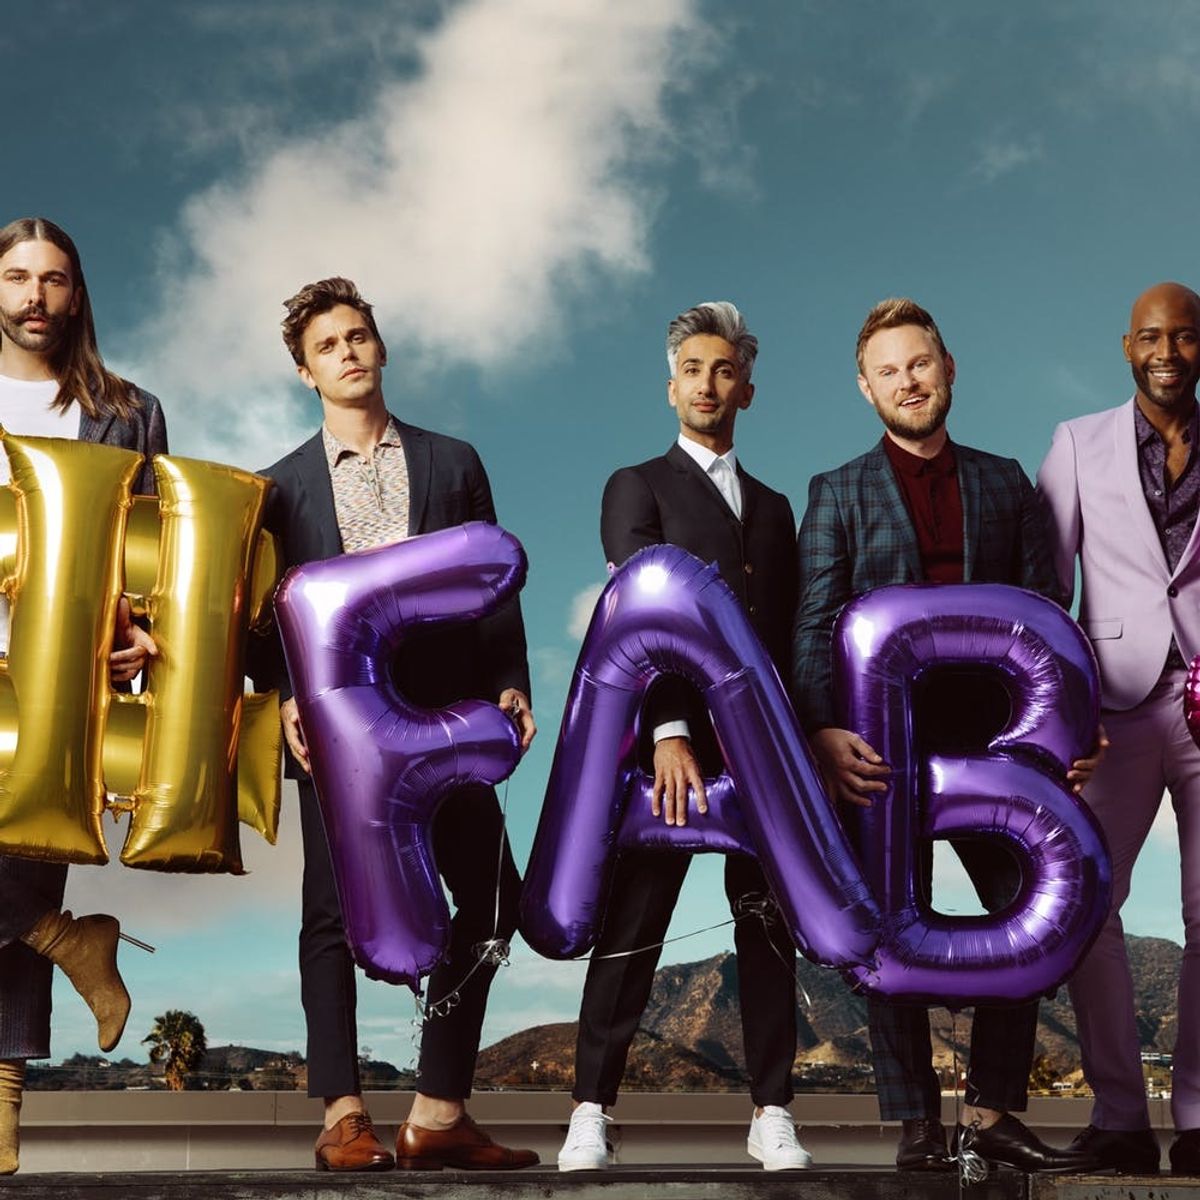 The ‘Queer Eye’ Season 2 Trailer Just Dropped and We’re Already Ugly-Crying